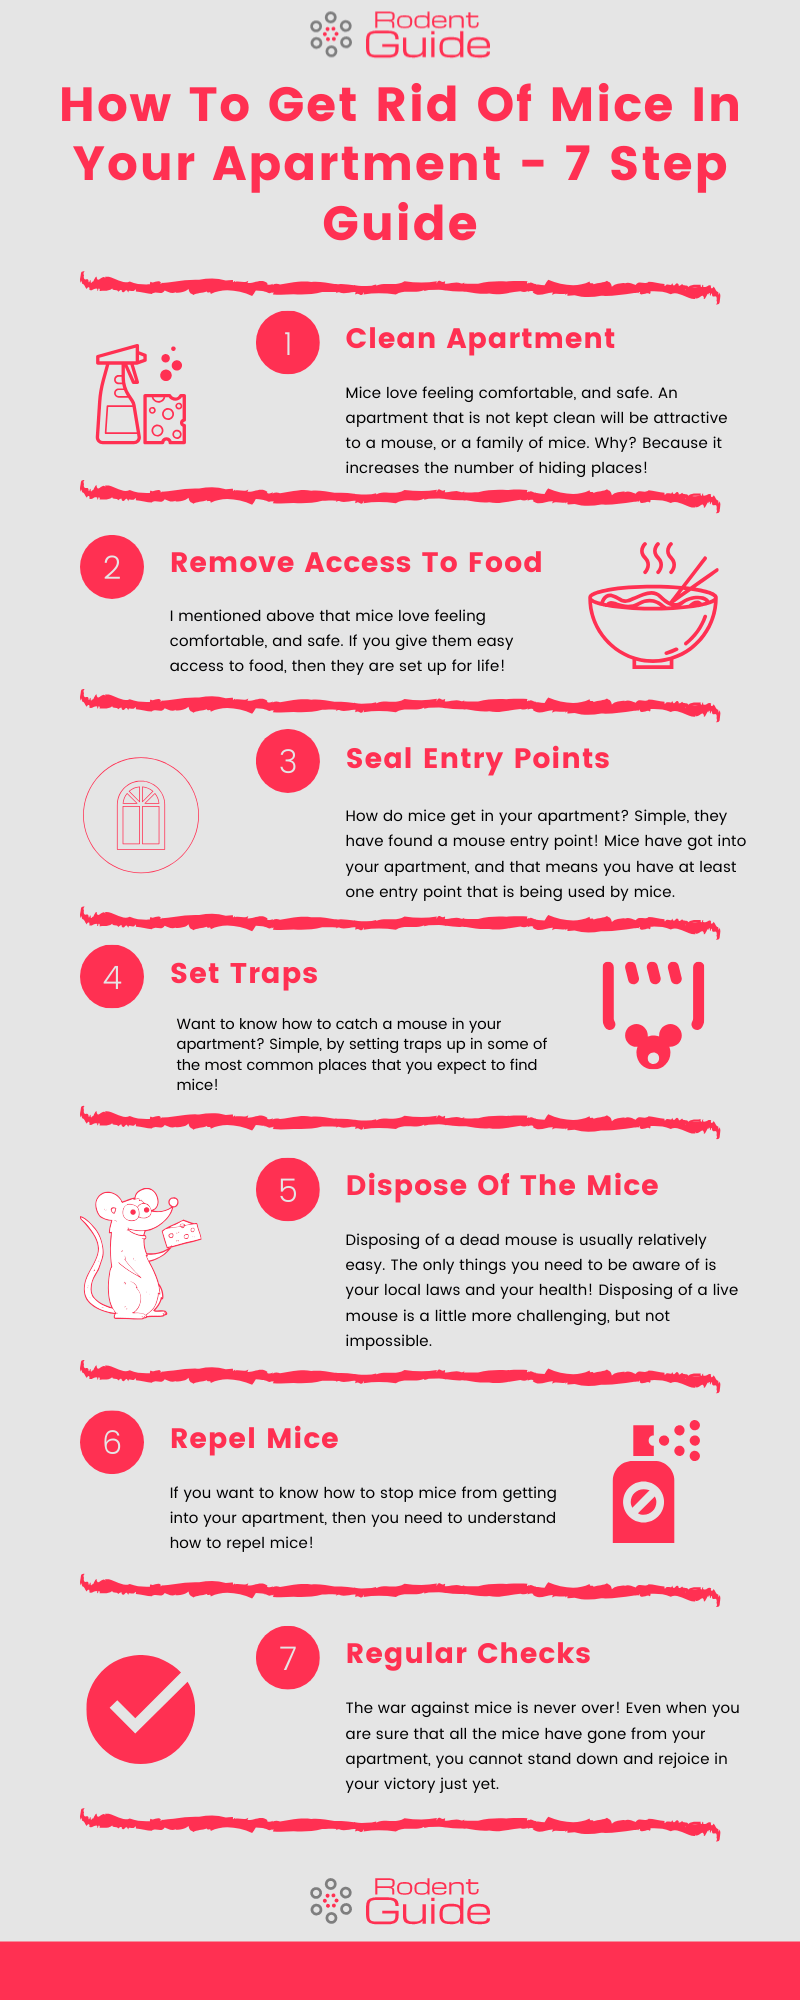 How To Get Rid Of Mice In Apartment Infographic